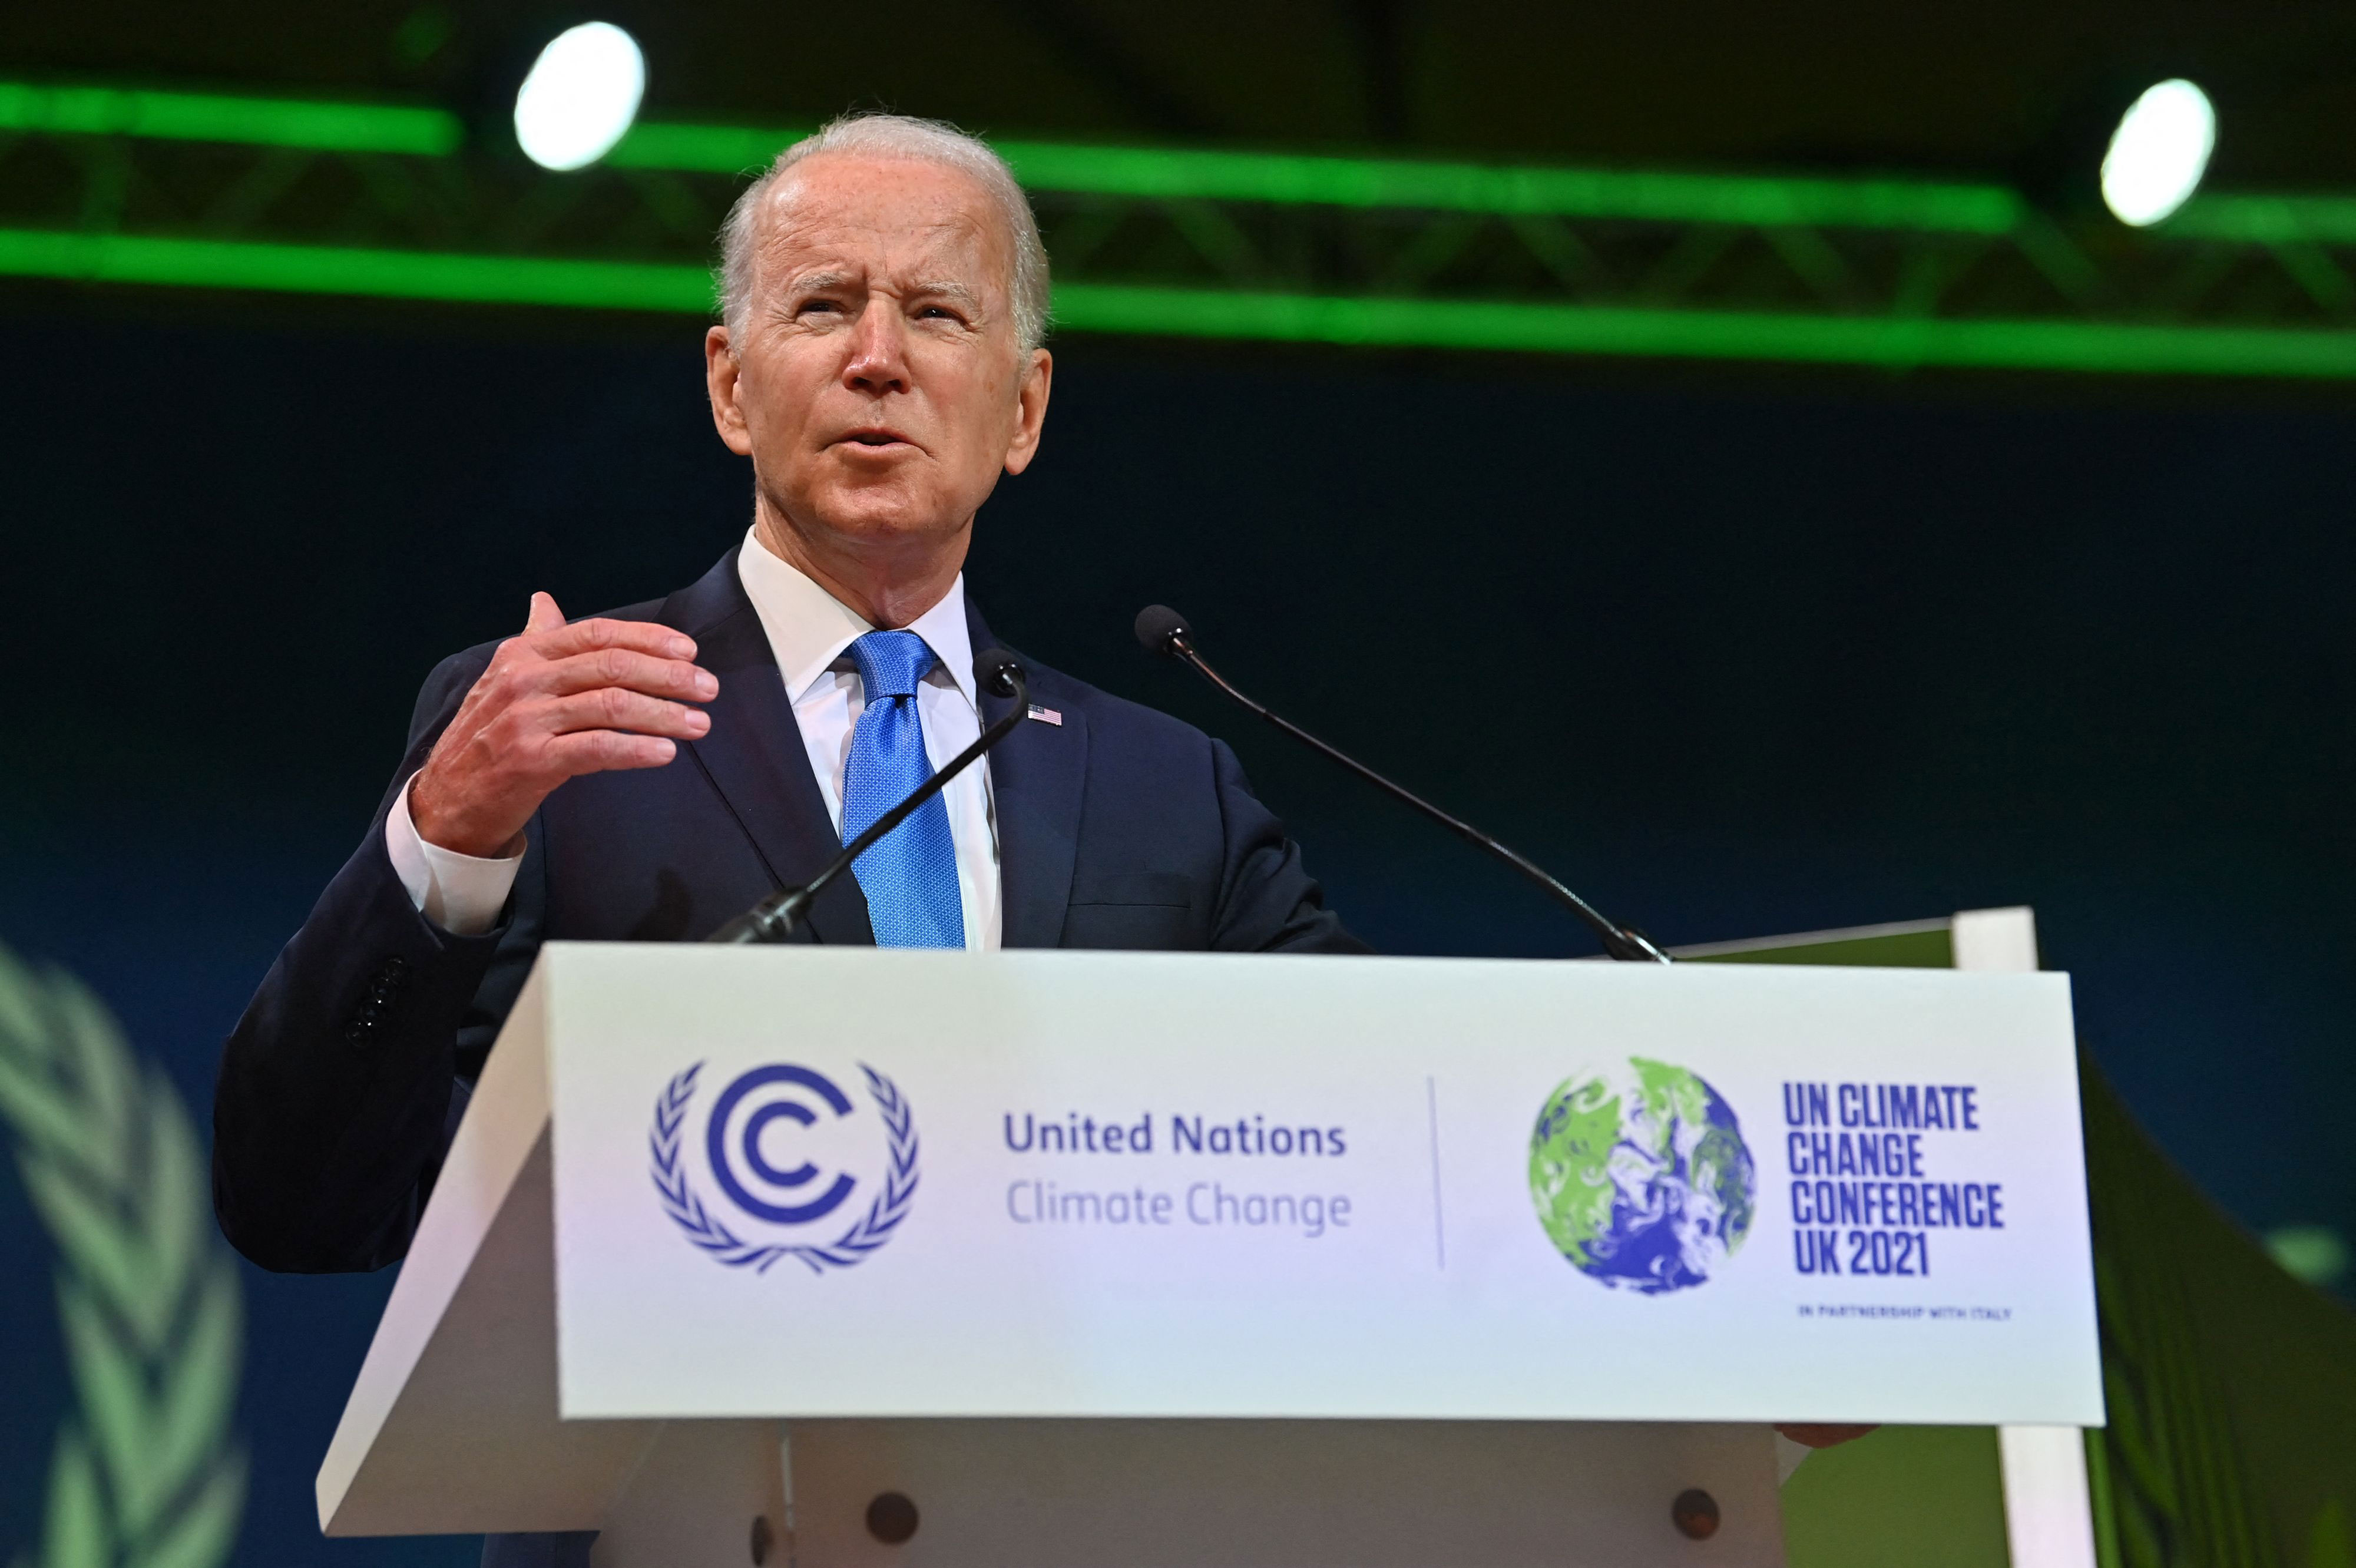 Cop26 in Glasgow: Live updates on the climate change summit